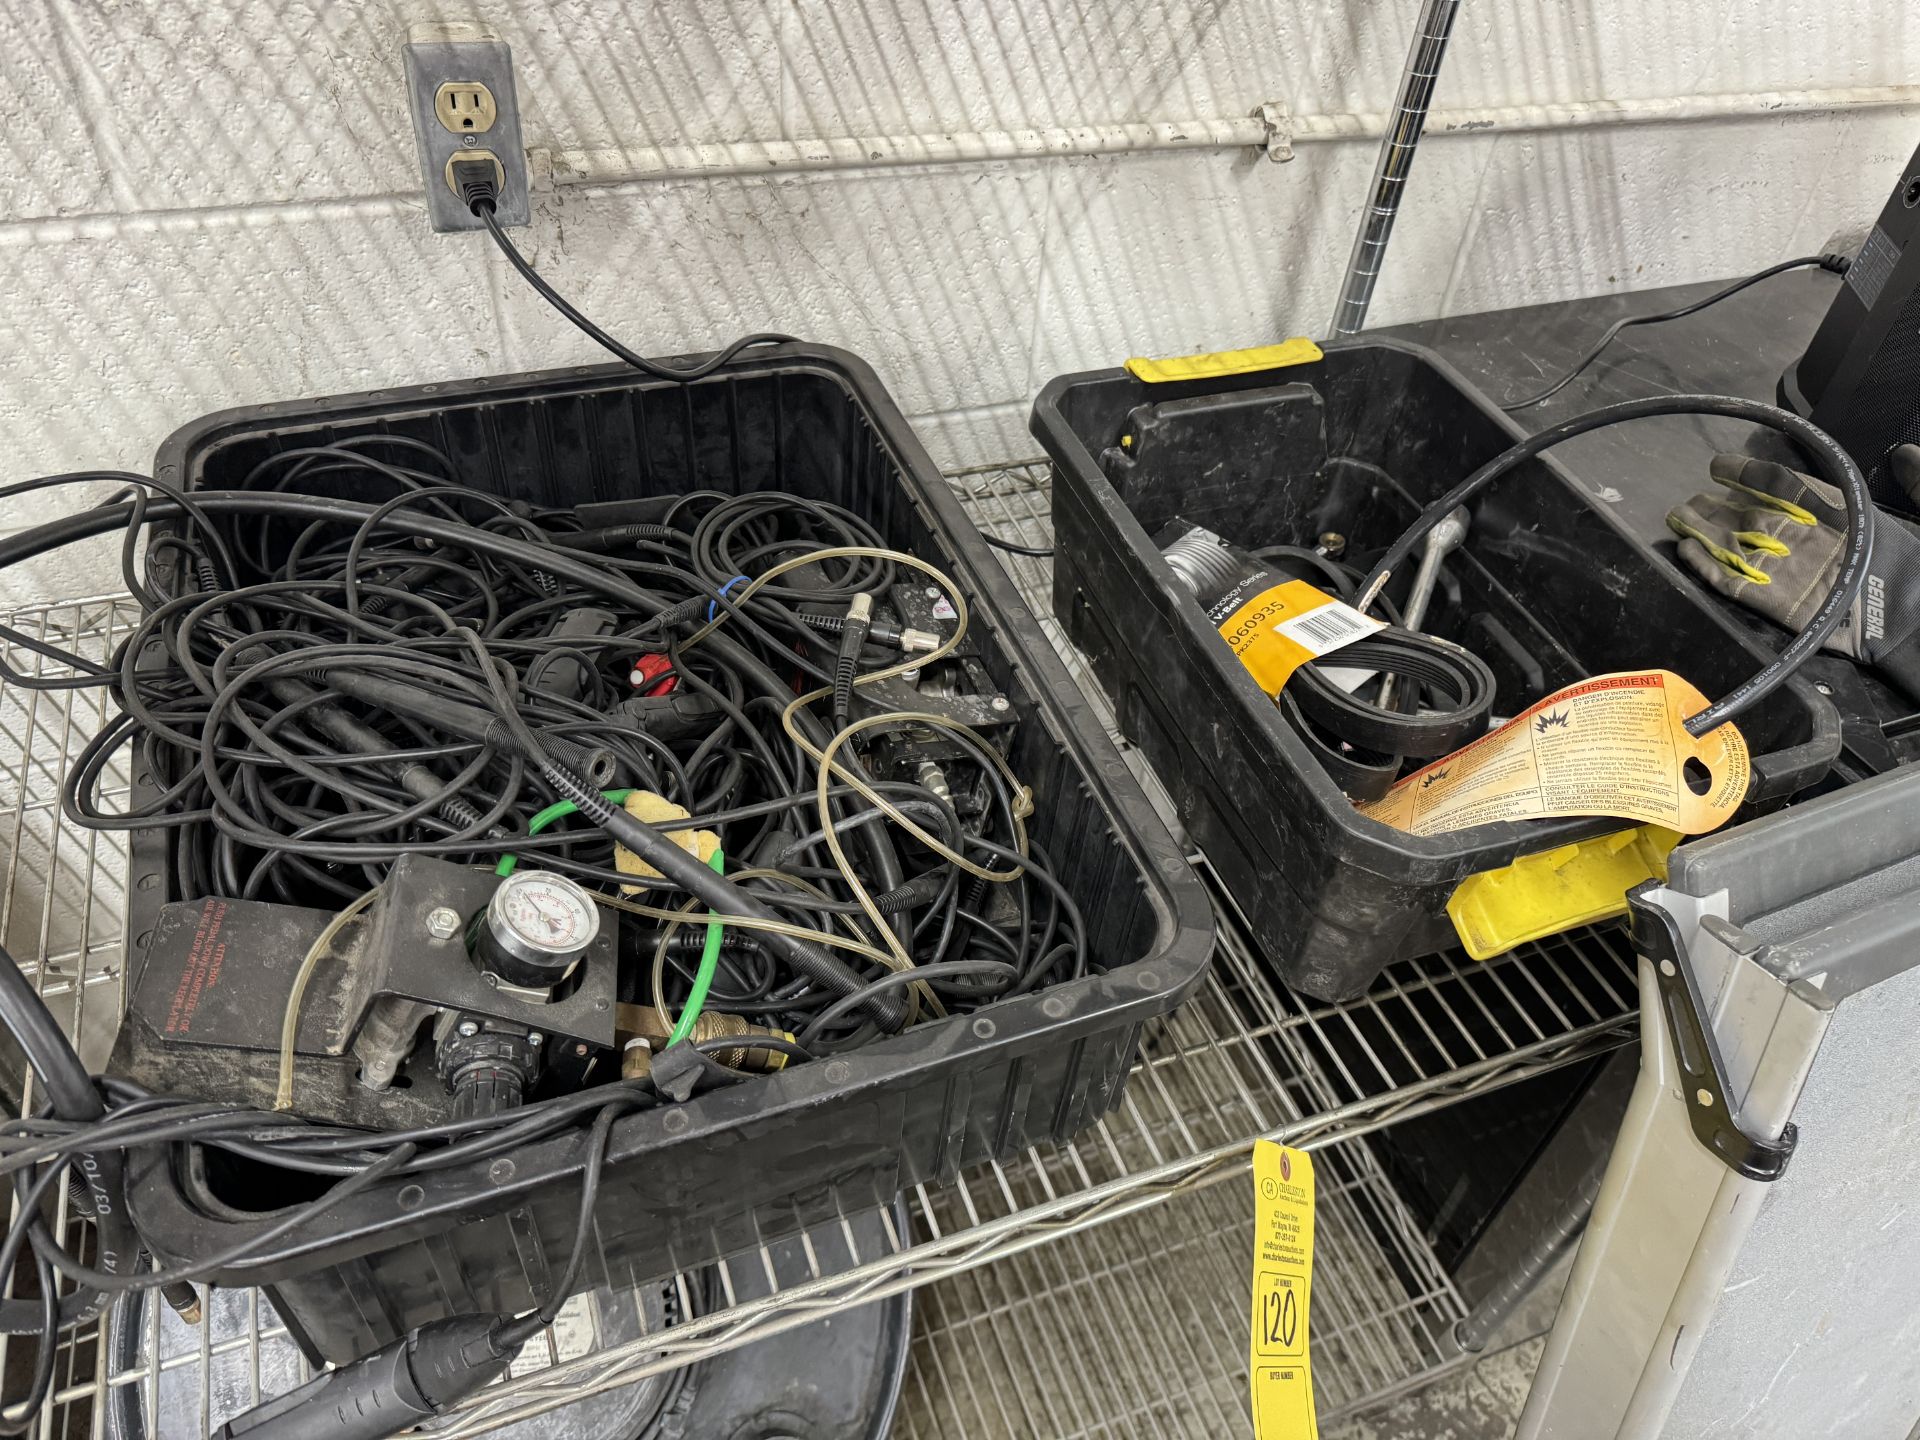 CONTENTS OF RACK: V-BELTS AND MISC WIRE